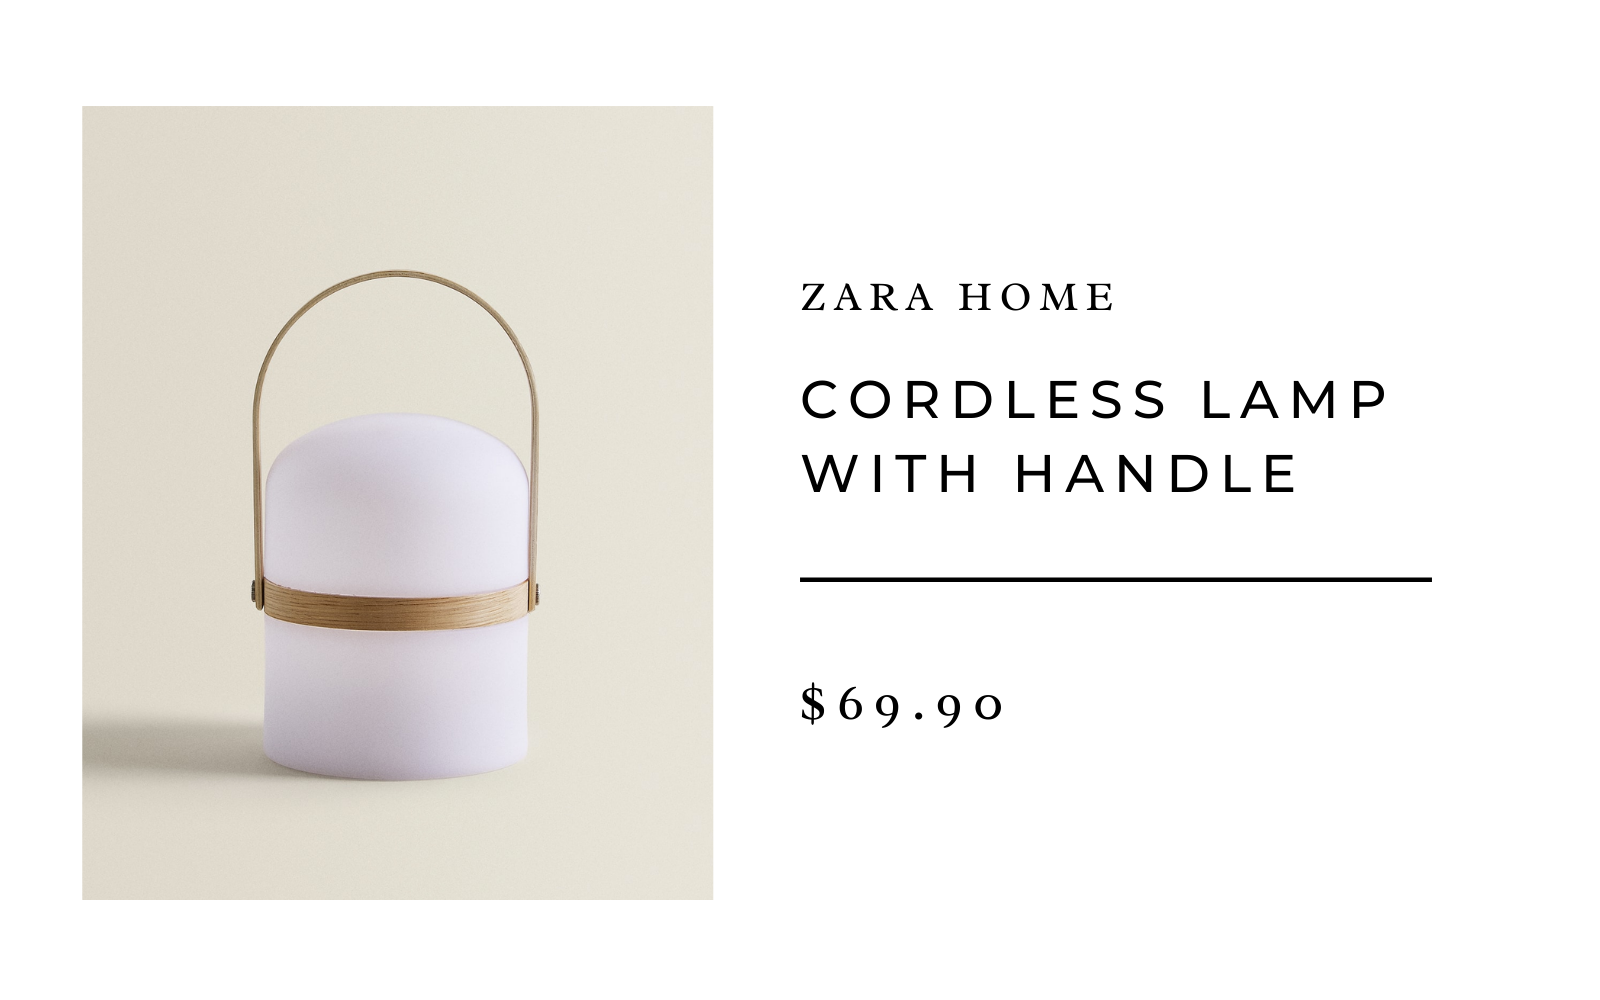 Zara Home Cordless Lamp With Handle